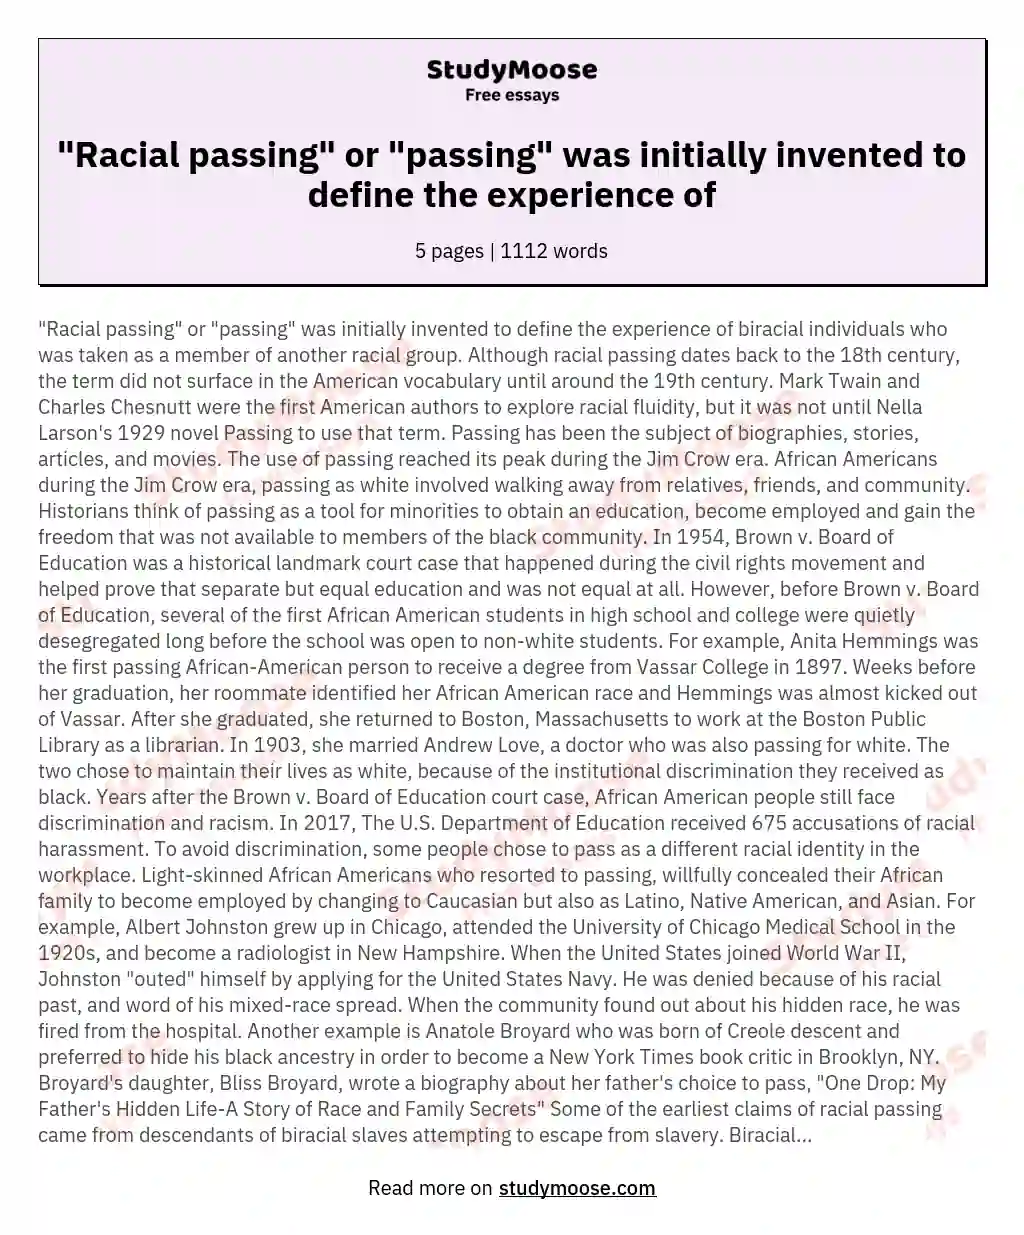 "Racial passing" or "passing" was initially invented to define the experience of